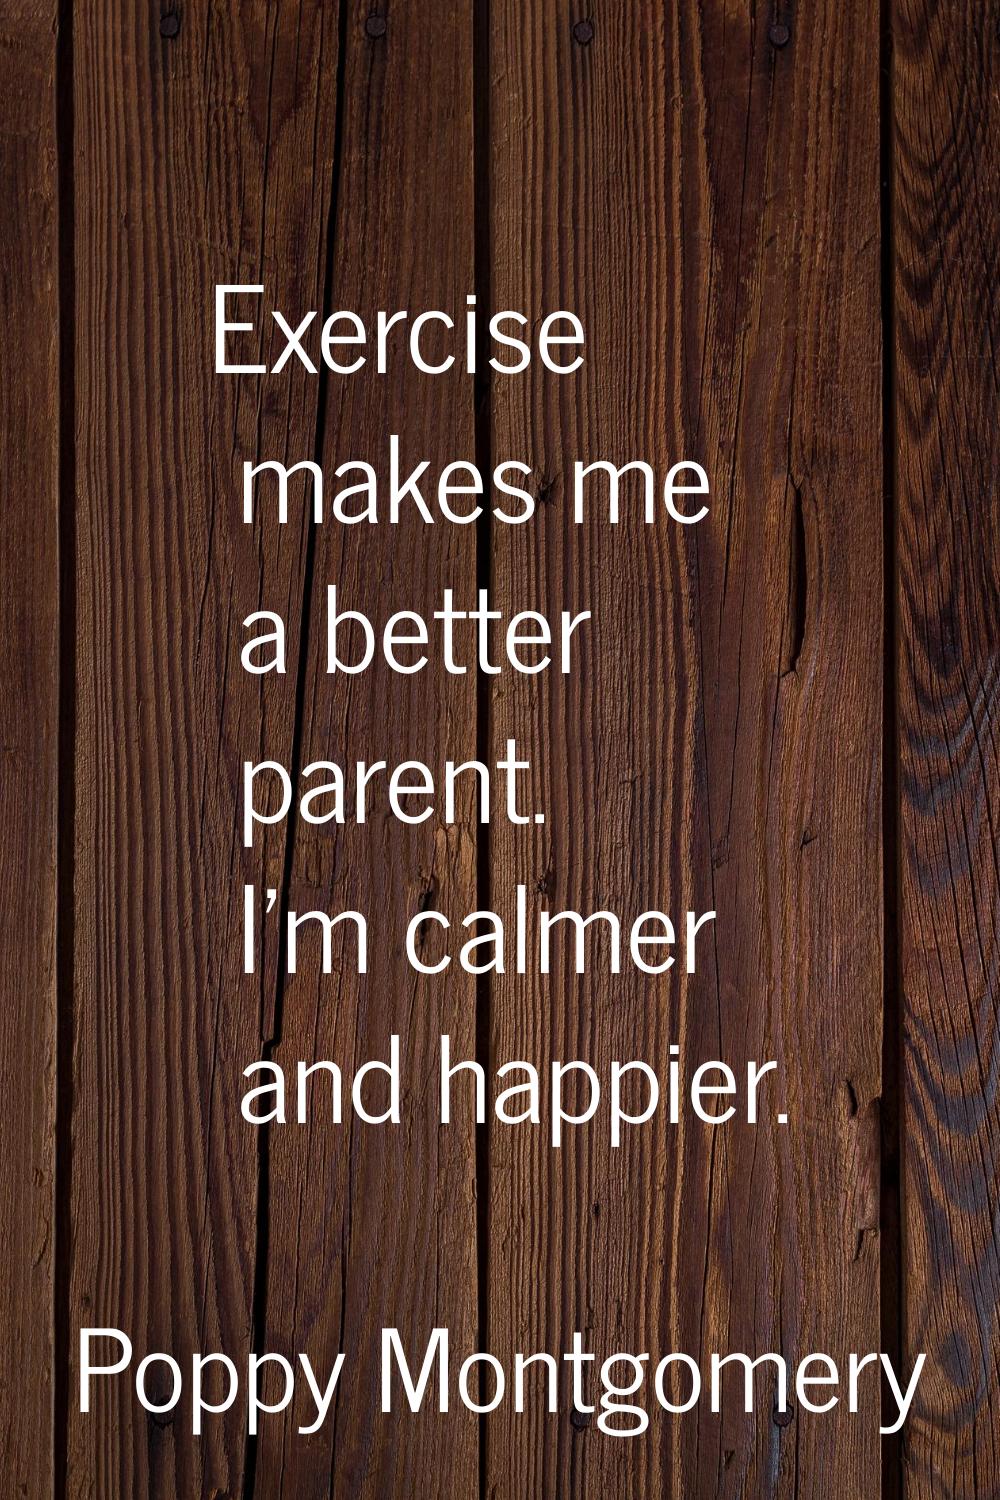 Exercise makes me a better parent. I'm calmer and happier.